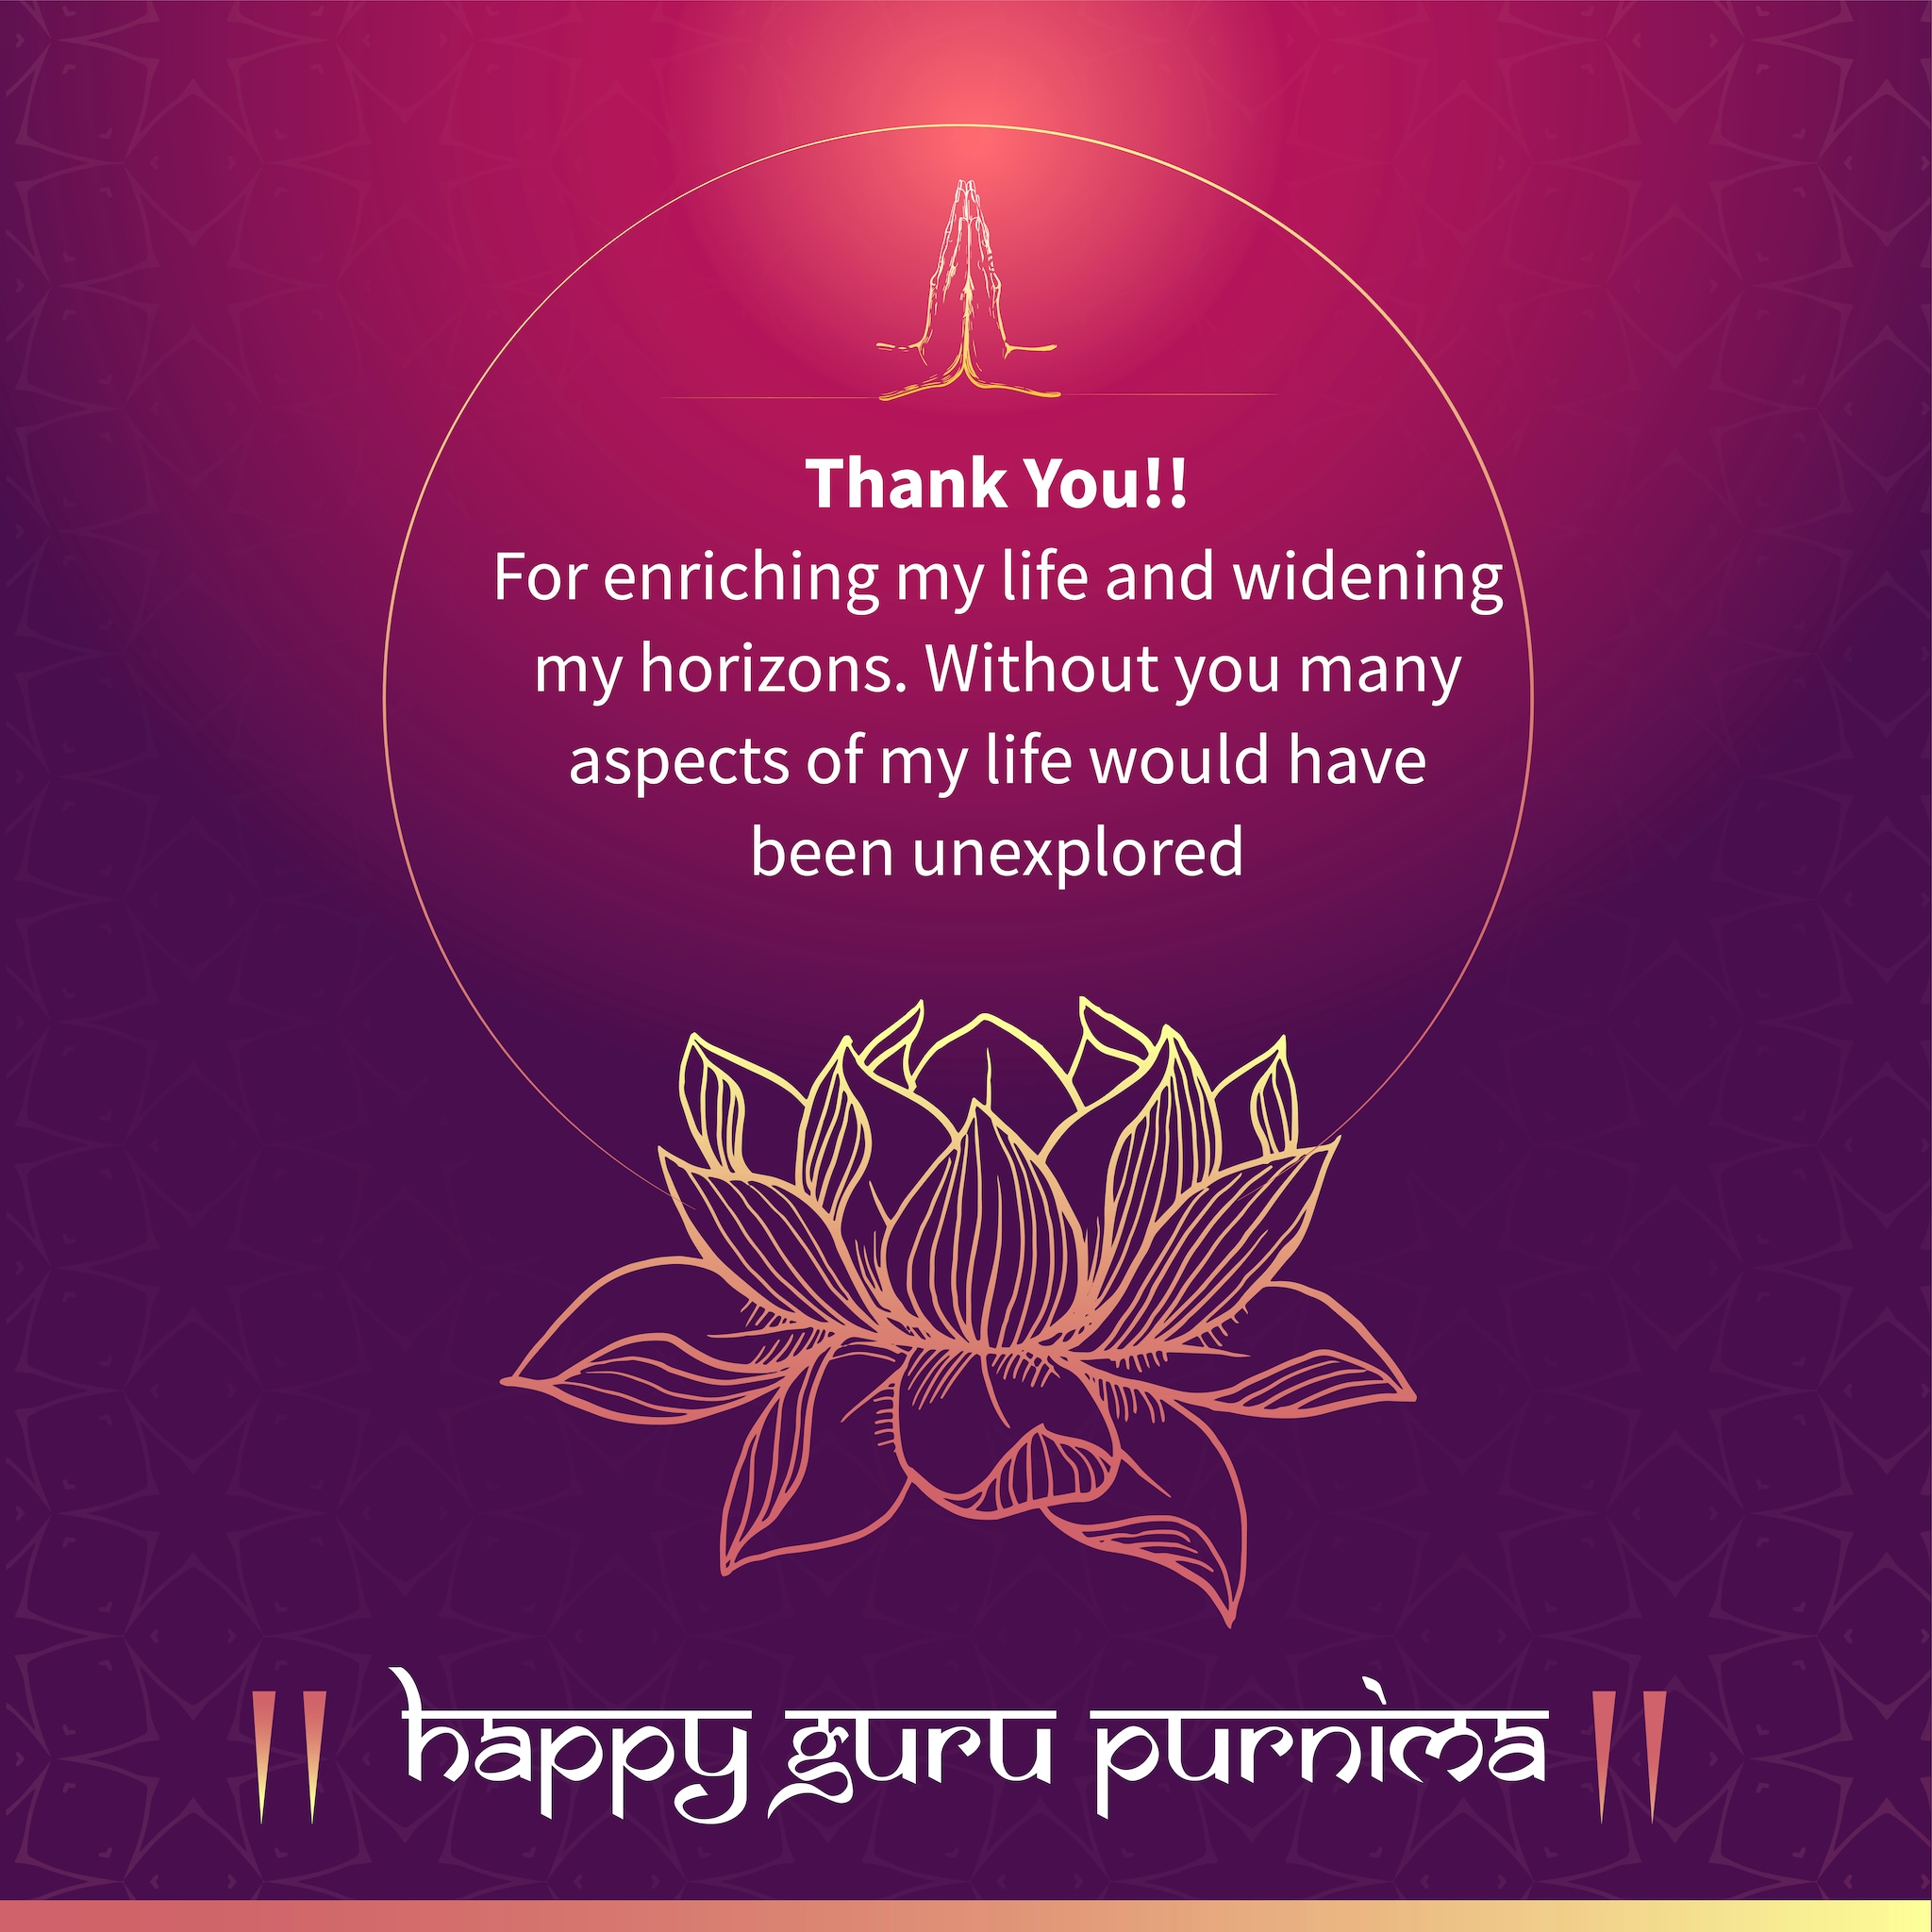 Happy Guru Purnima 2022: Images, Wishes, Quotes, Messages and WhatsApp Greetings to Share. (Image: Shutterstock)